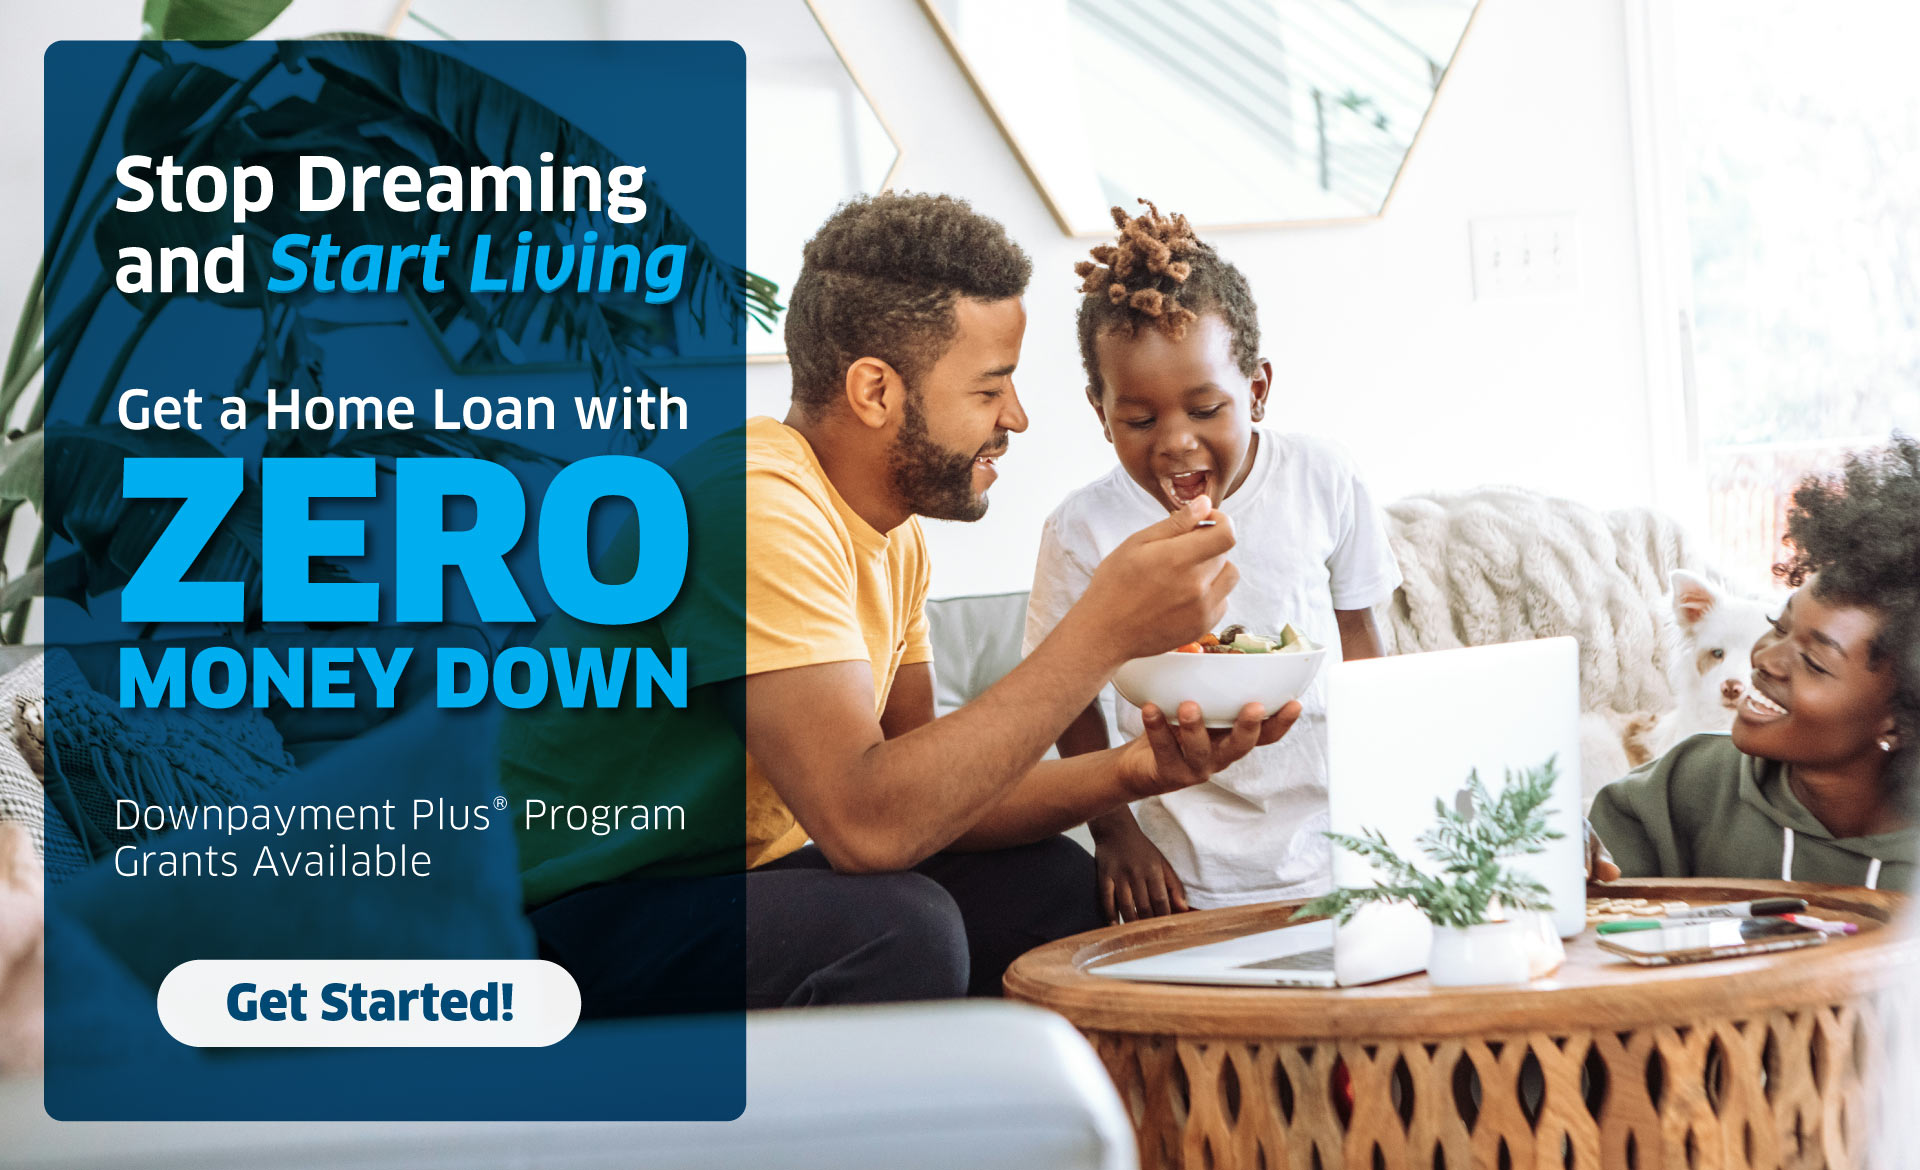 Stop Dreaming and Start Living! Get a Home Loan with ZERO Money Down with Downpayment Plus® Program Grants